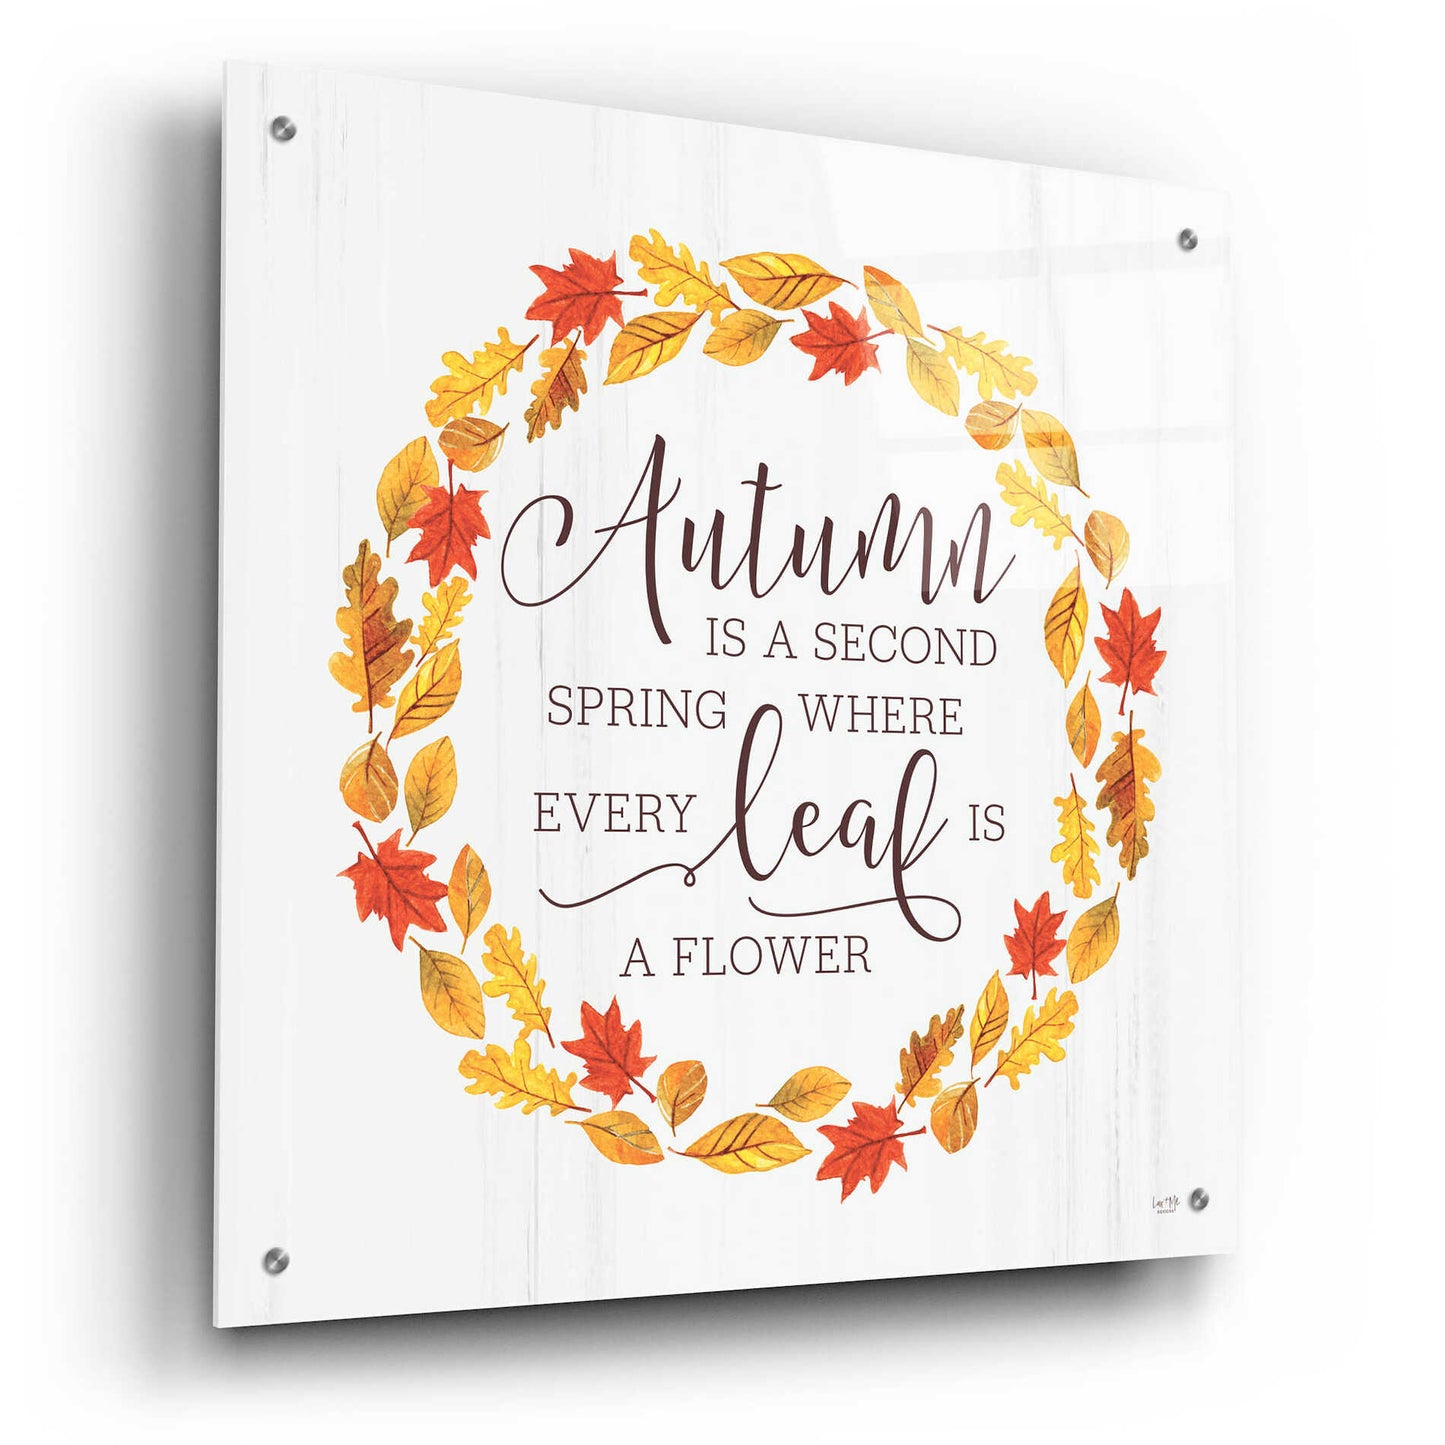 Epic Art 'Autumn is a Second Spring' by Lux + Me Designs, Acrylic Glass Wall Art,24x24